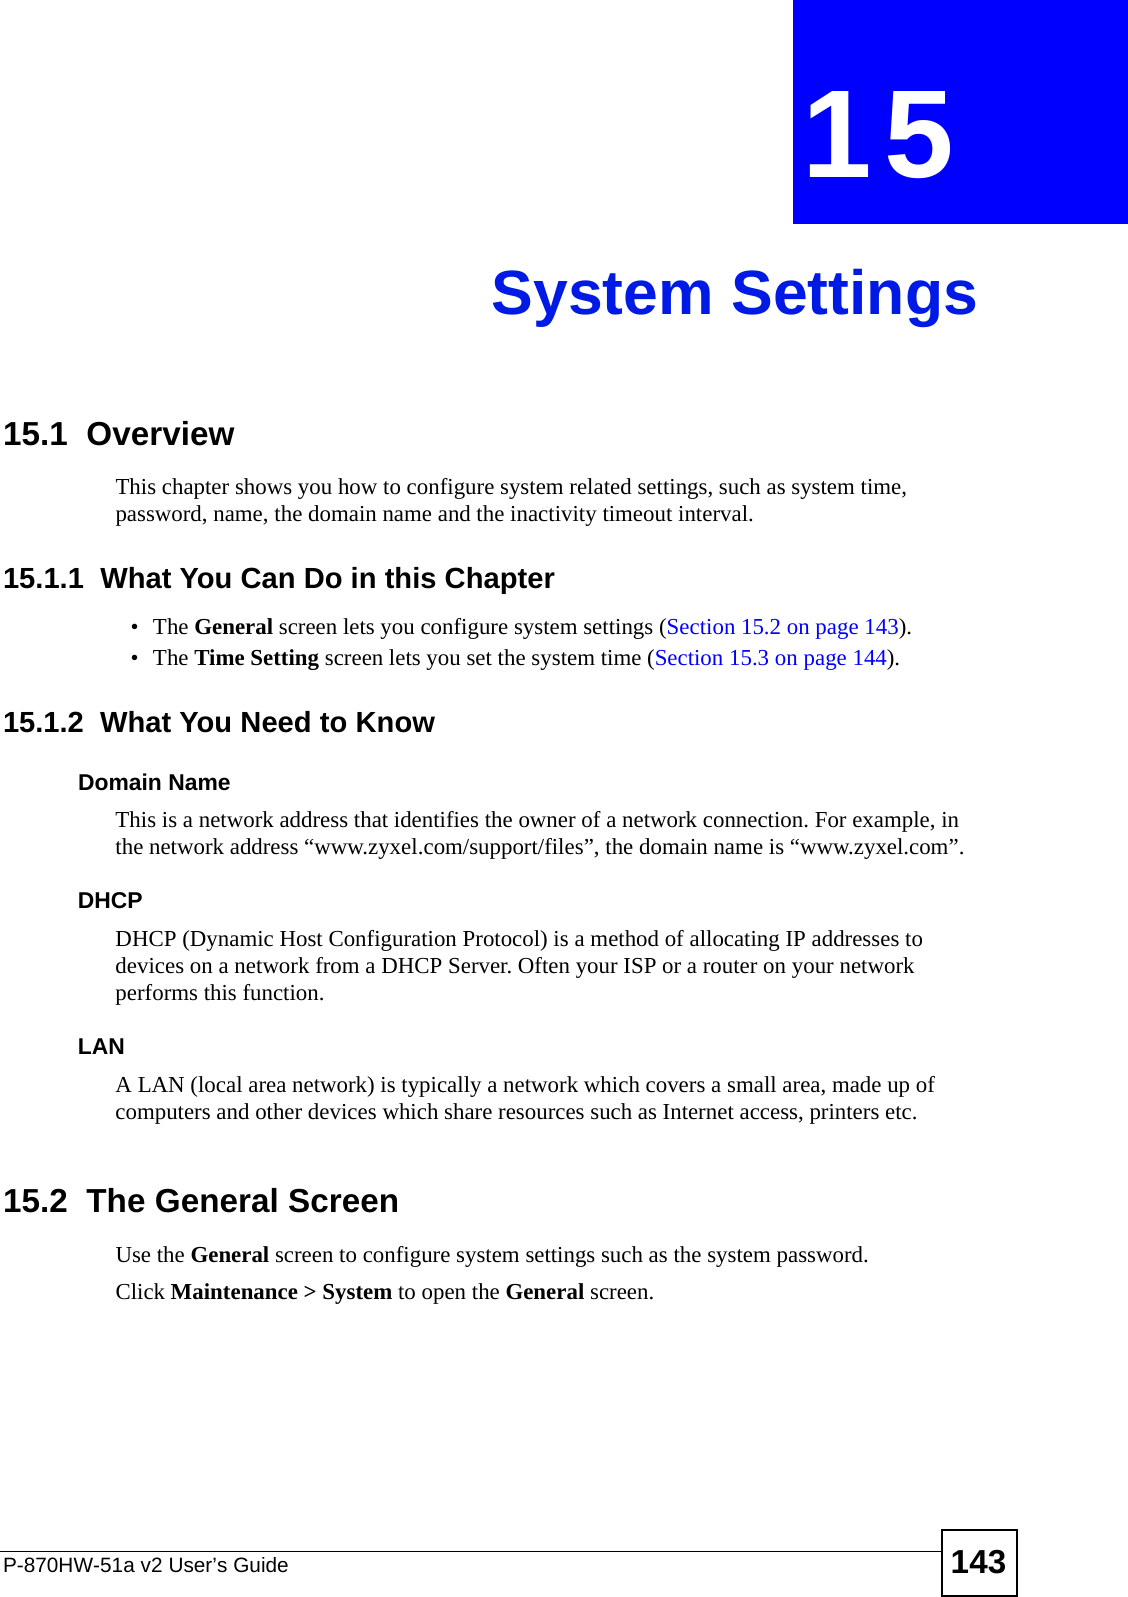 P-870HW-51a v2 User’s Guide 143CHAPTER  15 System Settings15.1  Overview This chapter shows you how to configure system related settings, such as system time, password, name, the domain name and the inactivity timeout interval.    15.1.1  What You Can Do in this Chapter•The General screen lets you configure system settings (Section 15.2 on page 143).•The Time Setting screen lets you set the system time (Section 15.3 on page 144).15.1.2  What You Need to KnowDomain NameThis is a network address that identifies the owner of a network connection. For example, in the network address “www.zyxel.com/support/files”, the domain name is “www.zyxel.com”. DHCPDHCP (Dynamic Host Configuration Protocol) is a method of allocating IP addresses to devices on a network from a DHCP Server. Often your ISP or a router on your network performs this function.LANA LAN (local area network) is typically a network which covers a small area, made up of computers and other devices which share resources such as Internet access, printers etc.15.2  The General ScreenUse the General screen to configure system settings such as the system password.Click Maintenance &gt; System to open the General screen. 